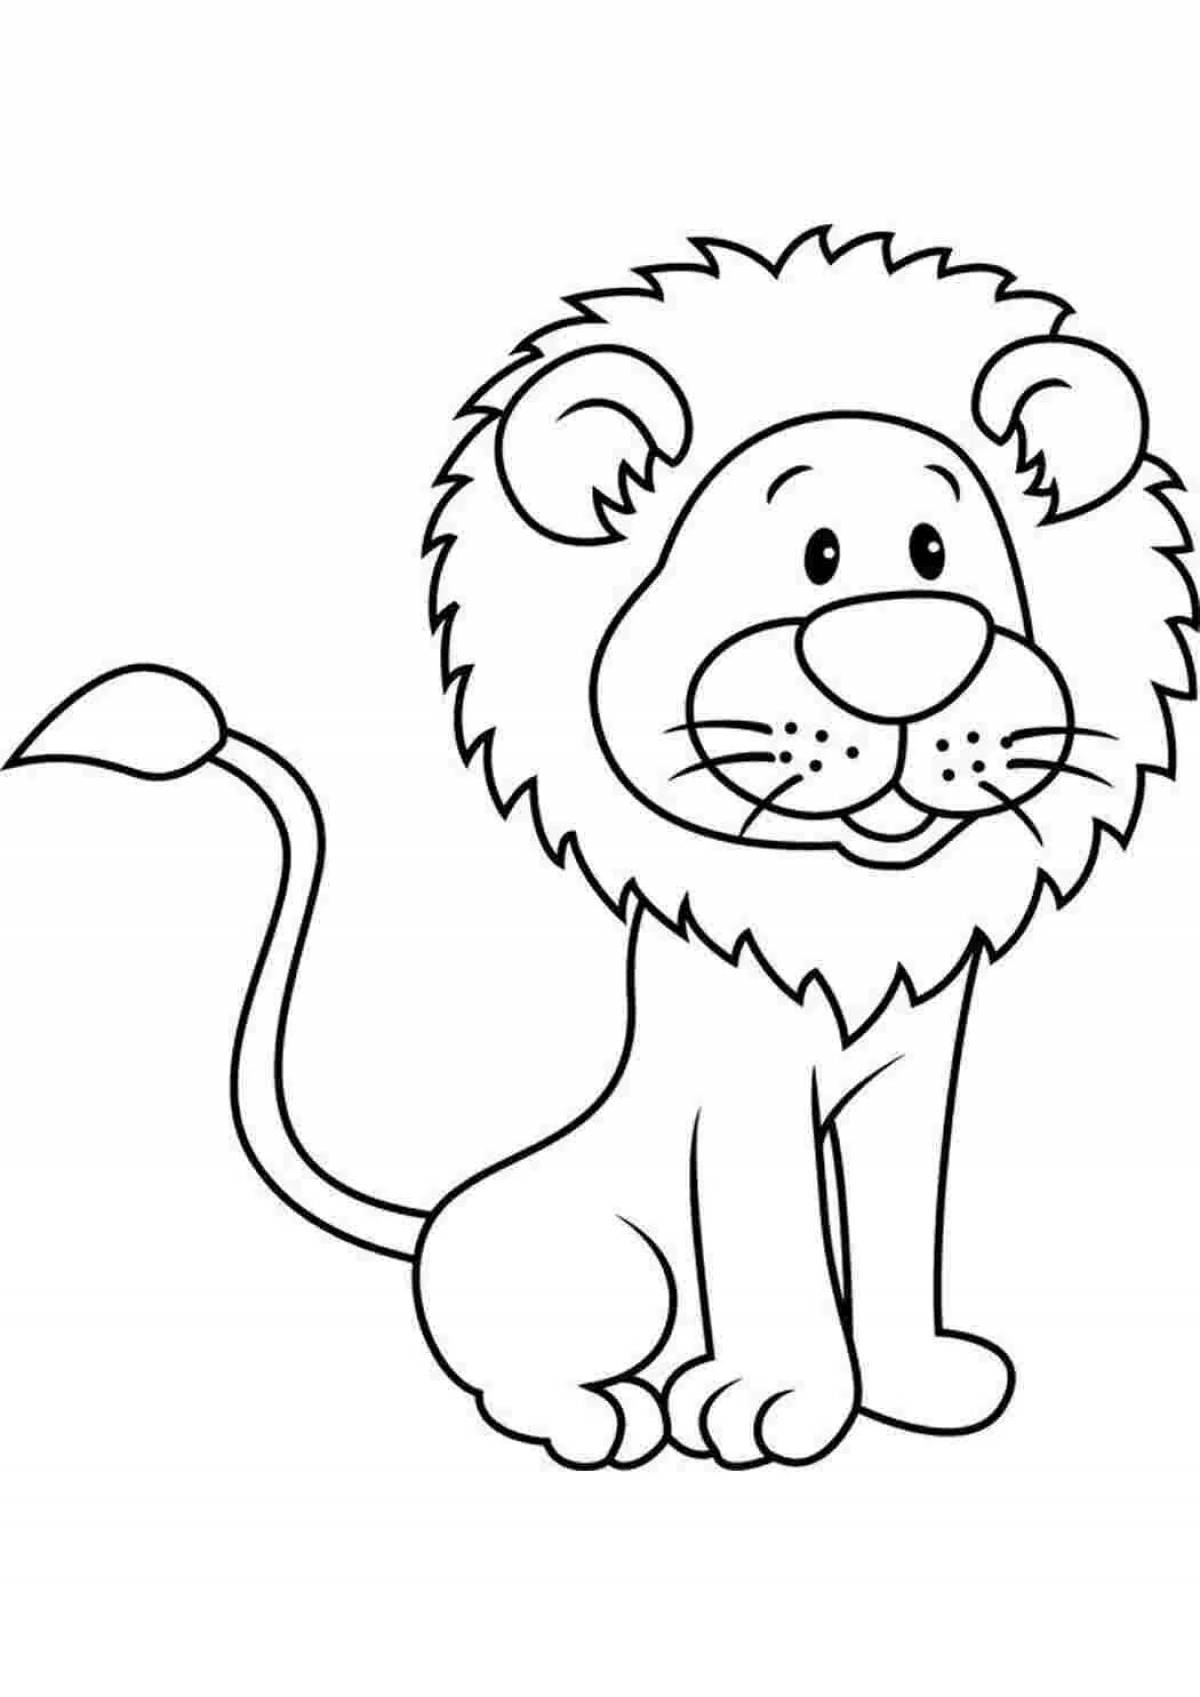 Creative lion drawing for kids